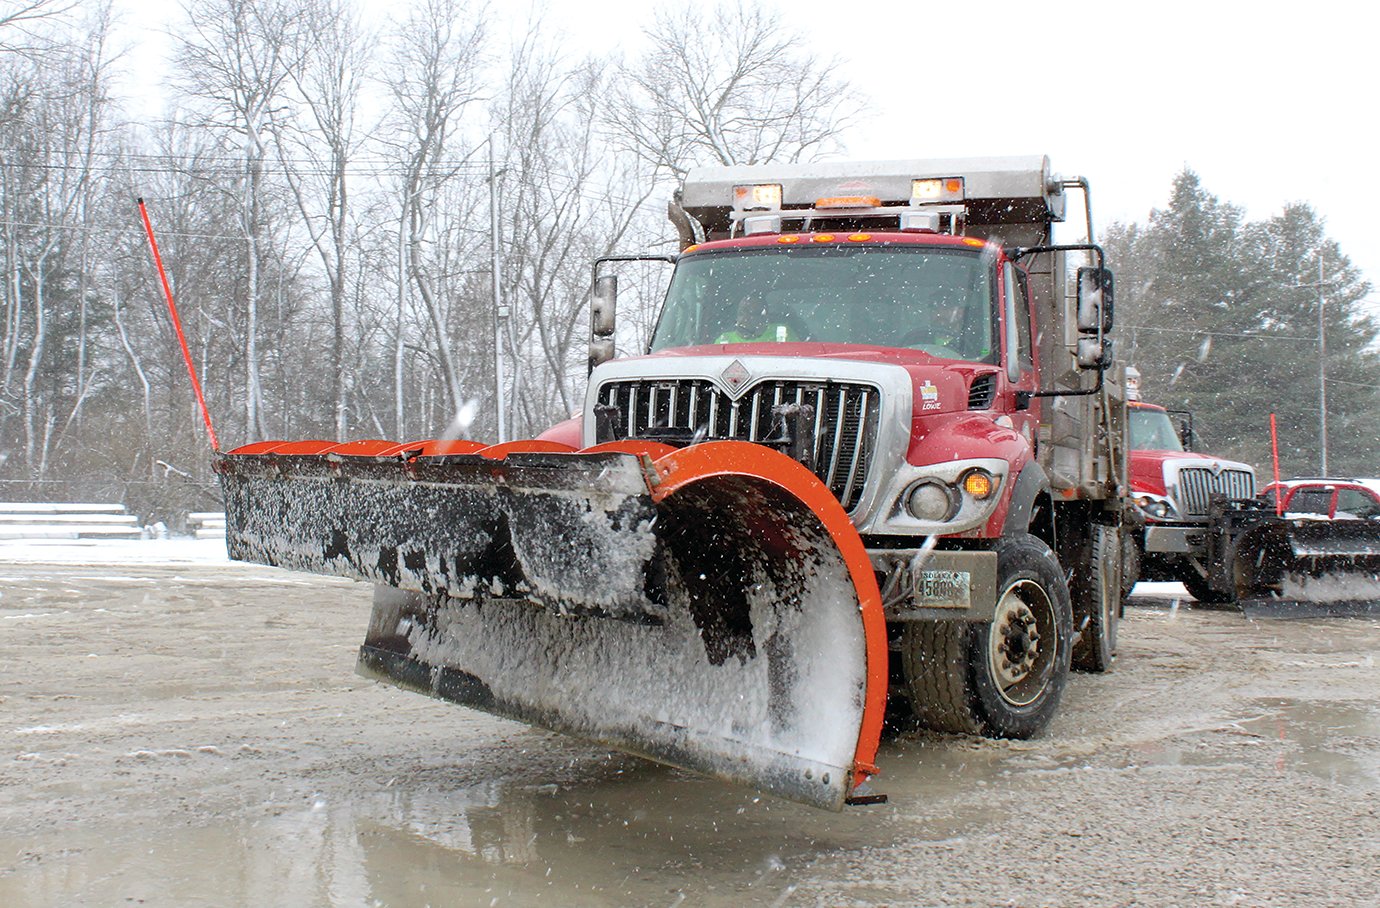 A Montgomery County Highway Department snow plow heads into action.